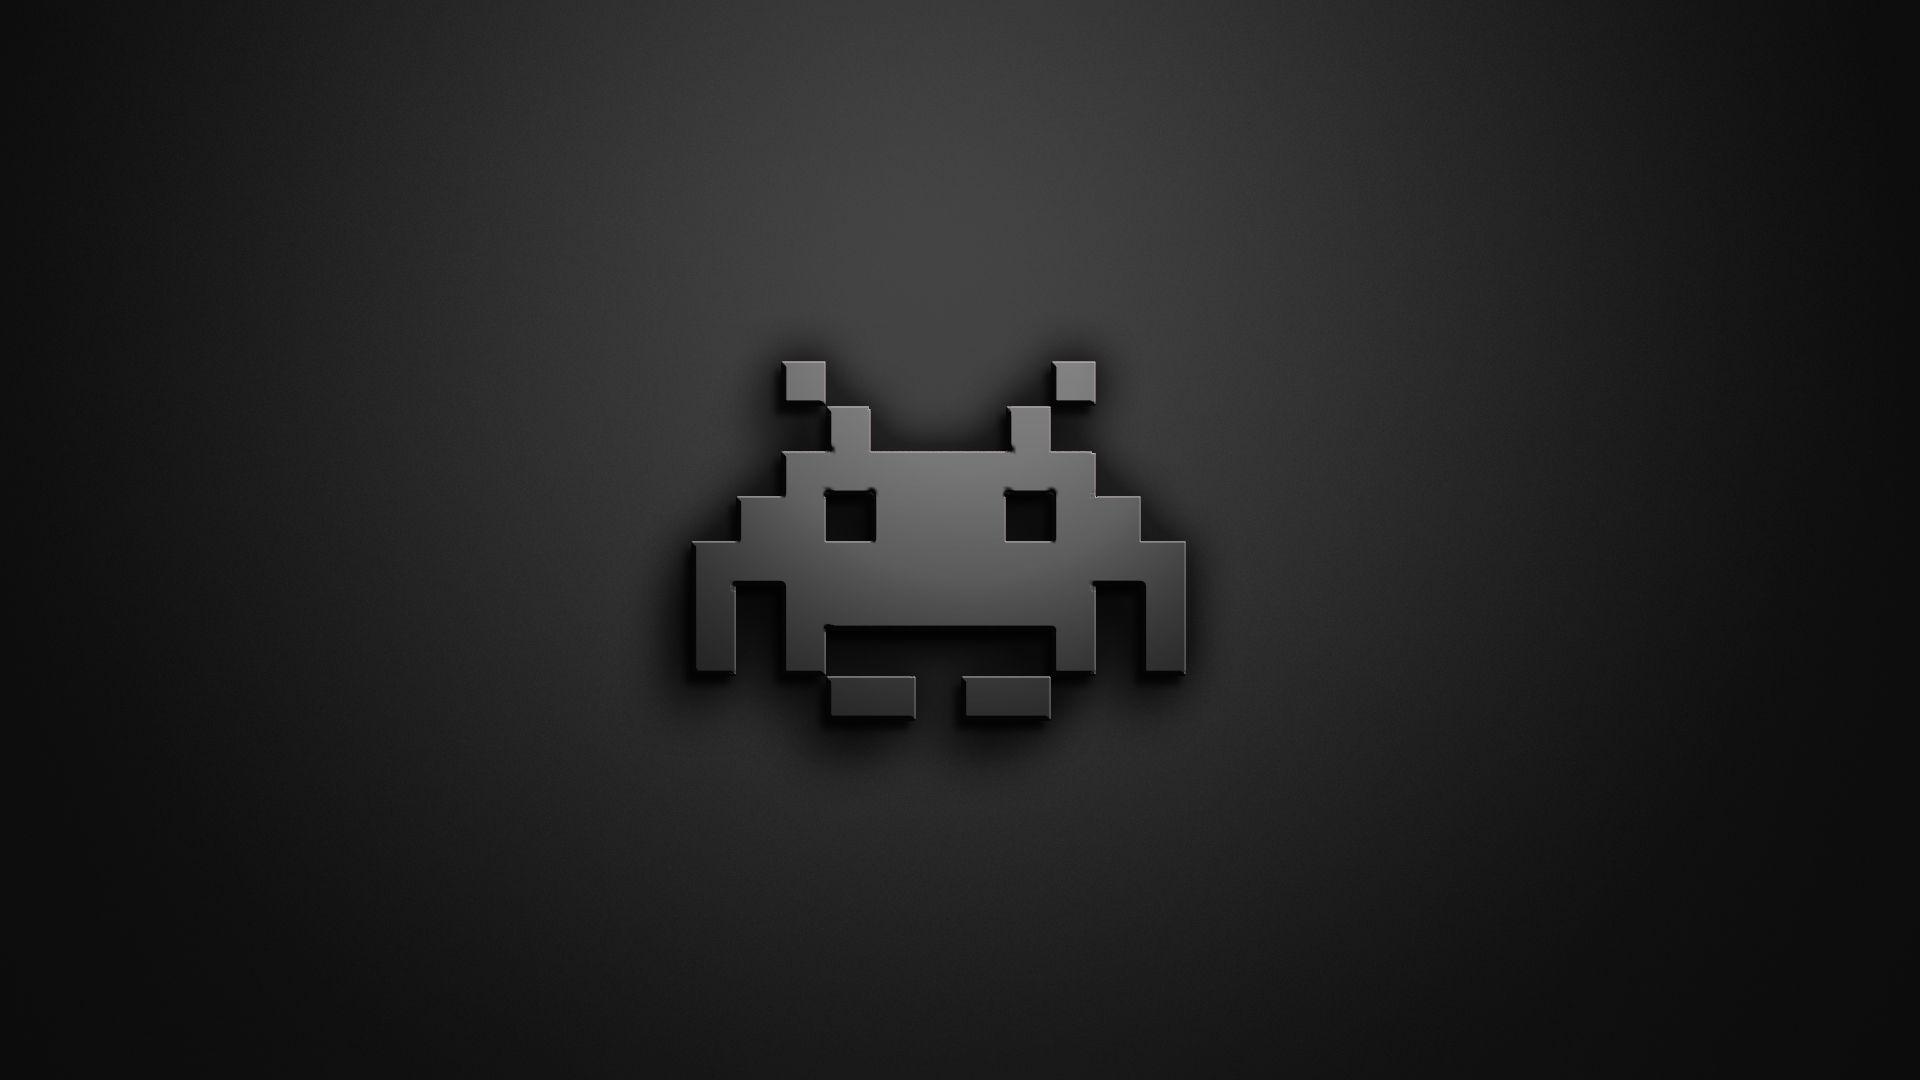 Space Invaders Wallpapers - Top Free Space Invaders Backgrounds ...